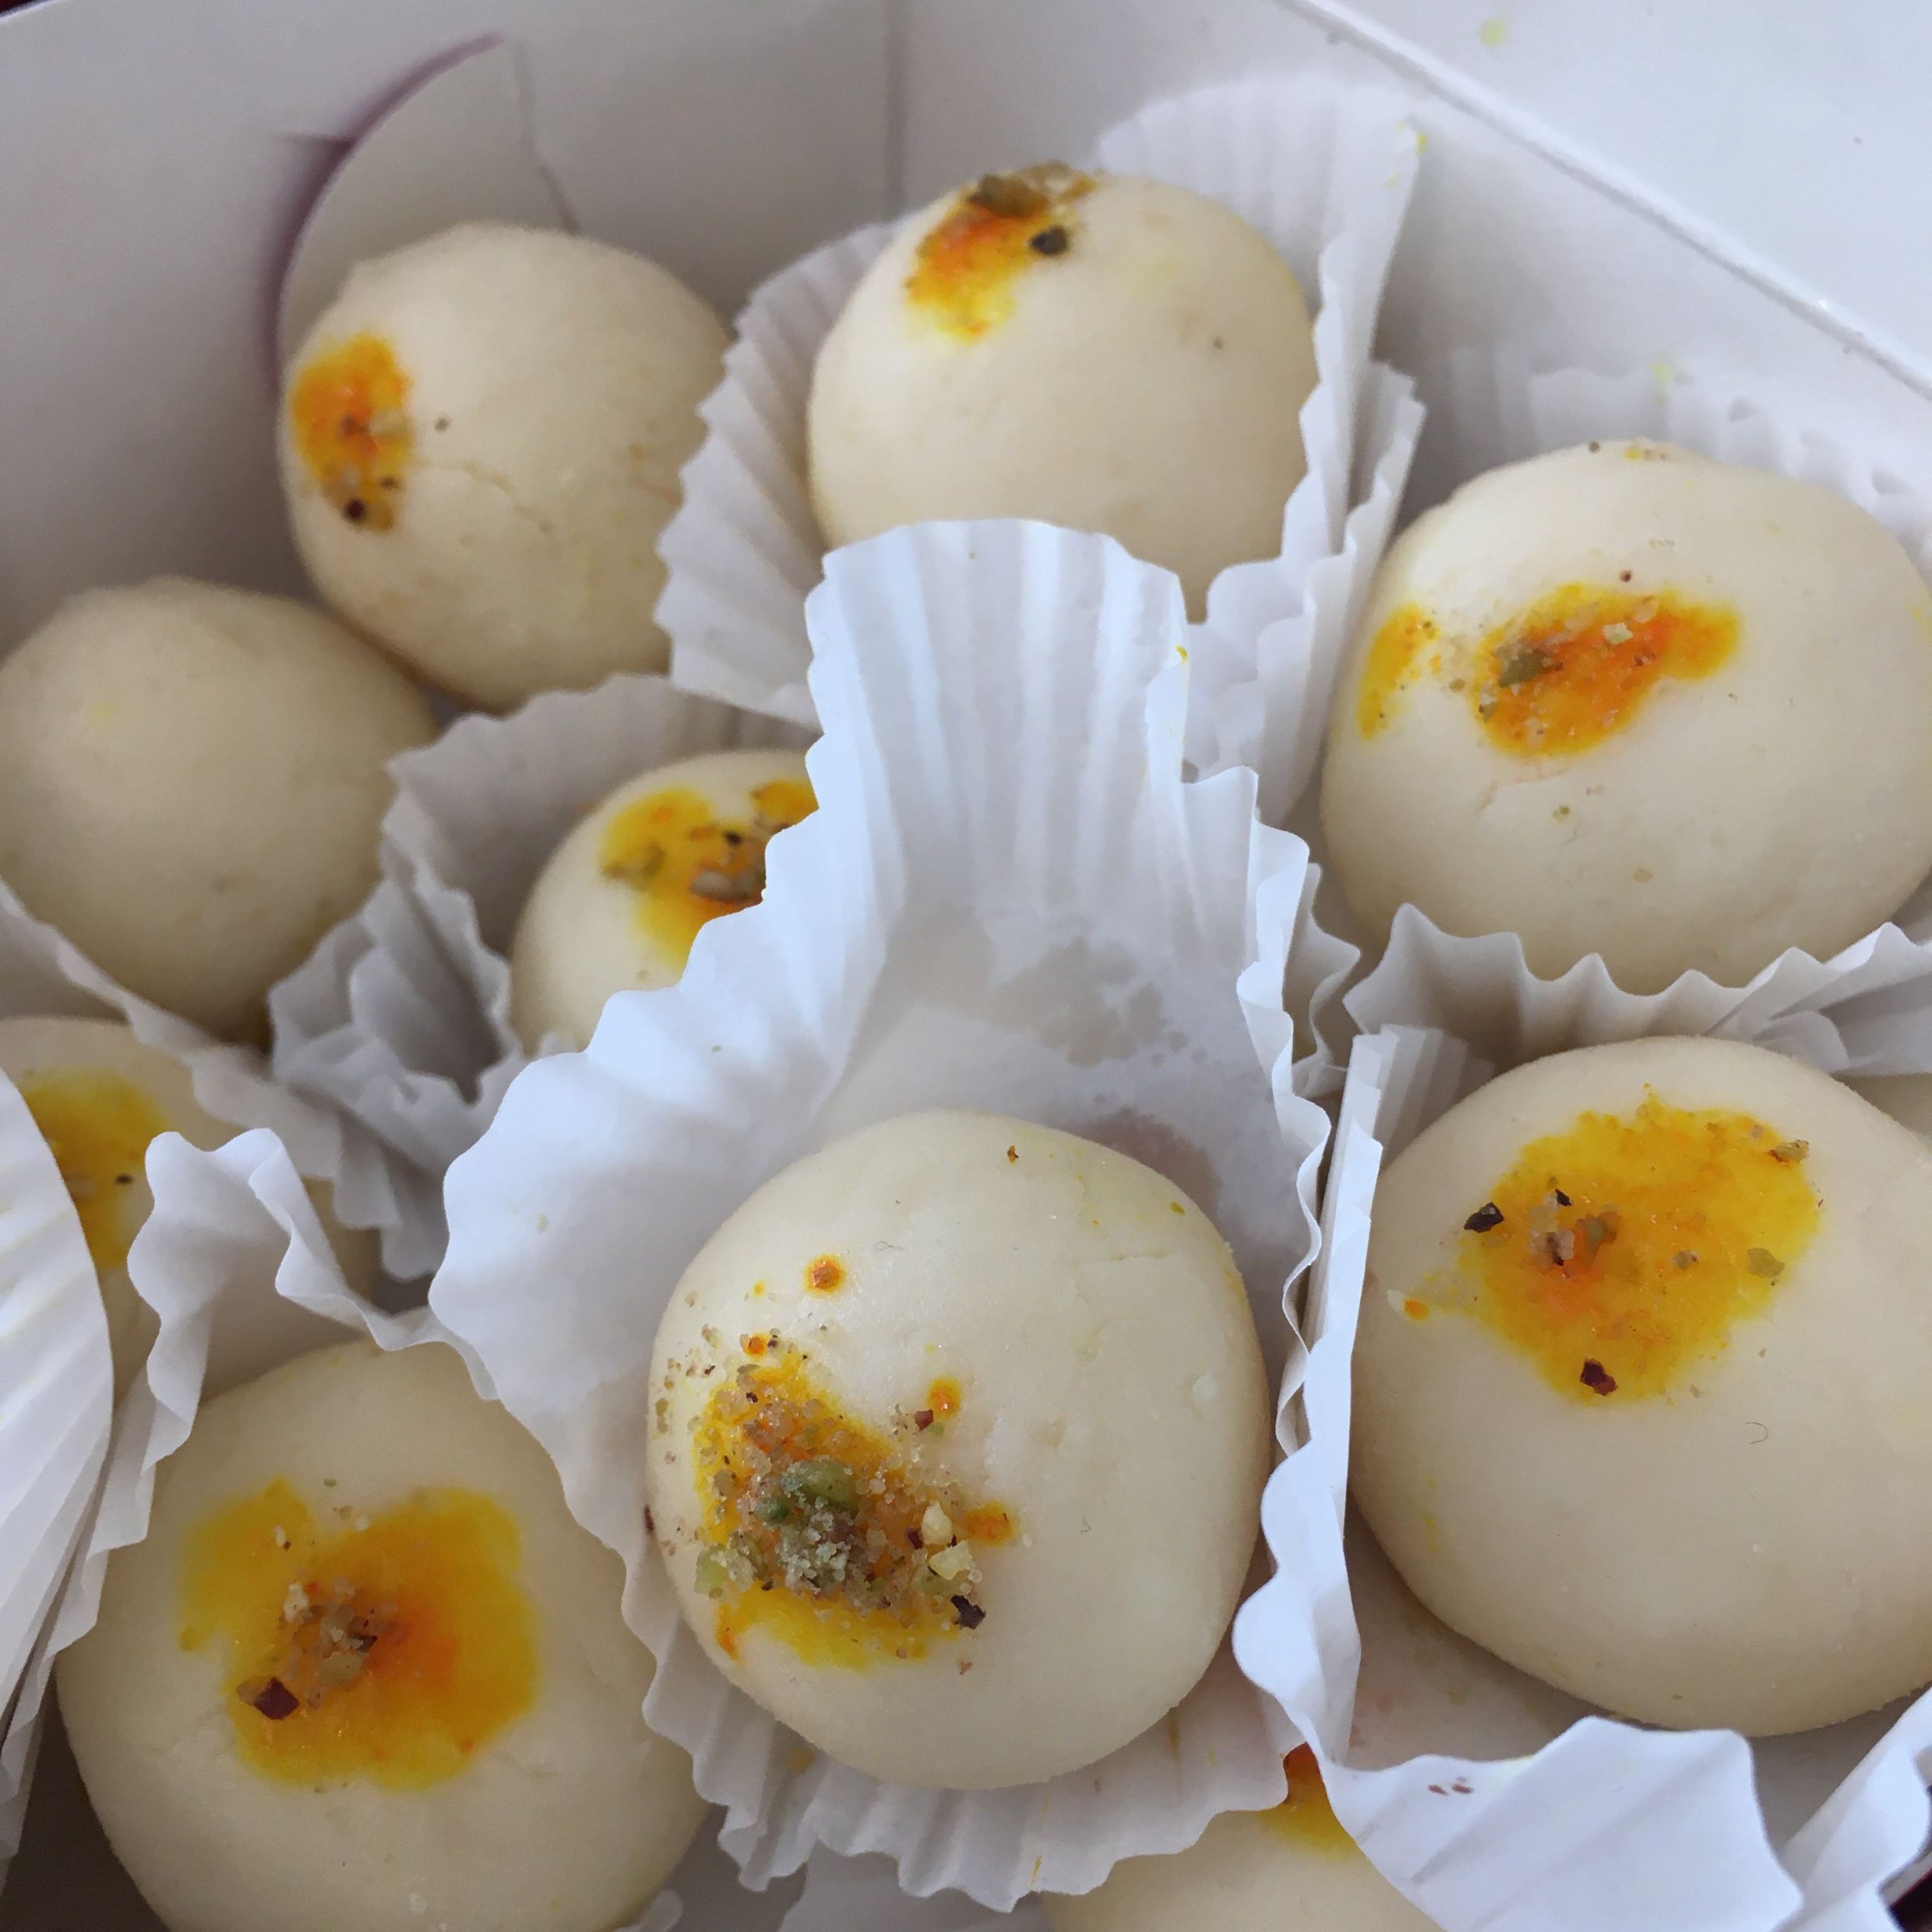 A box of many round sweets sprinkled with pistachio and amber; each one in a muffin wrapper. 